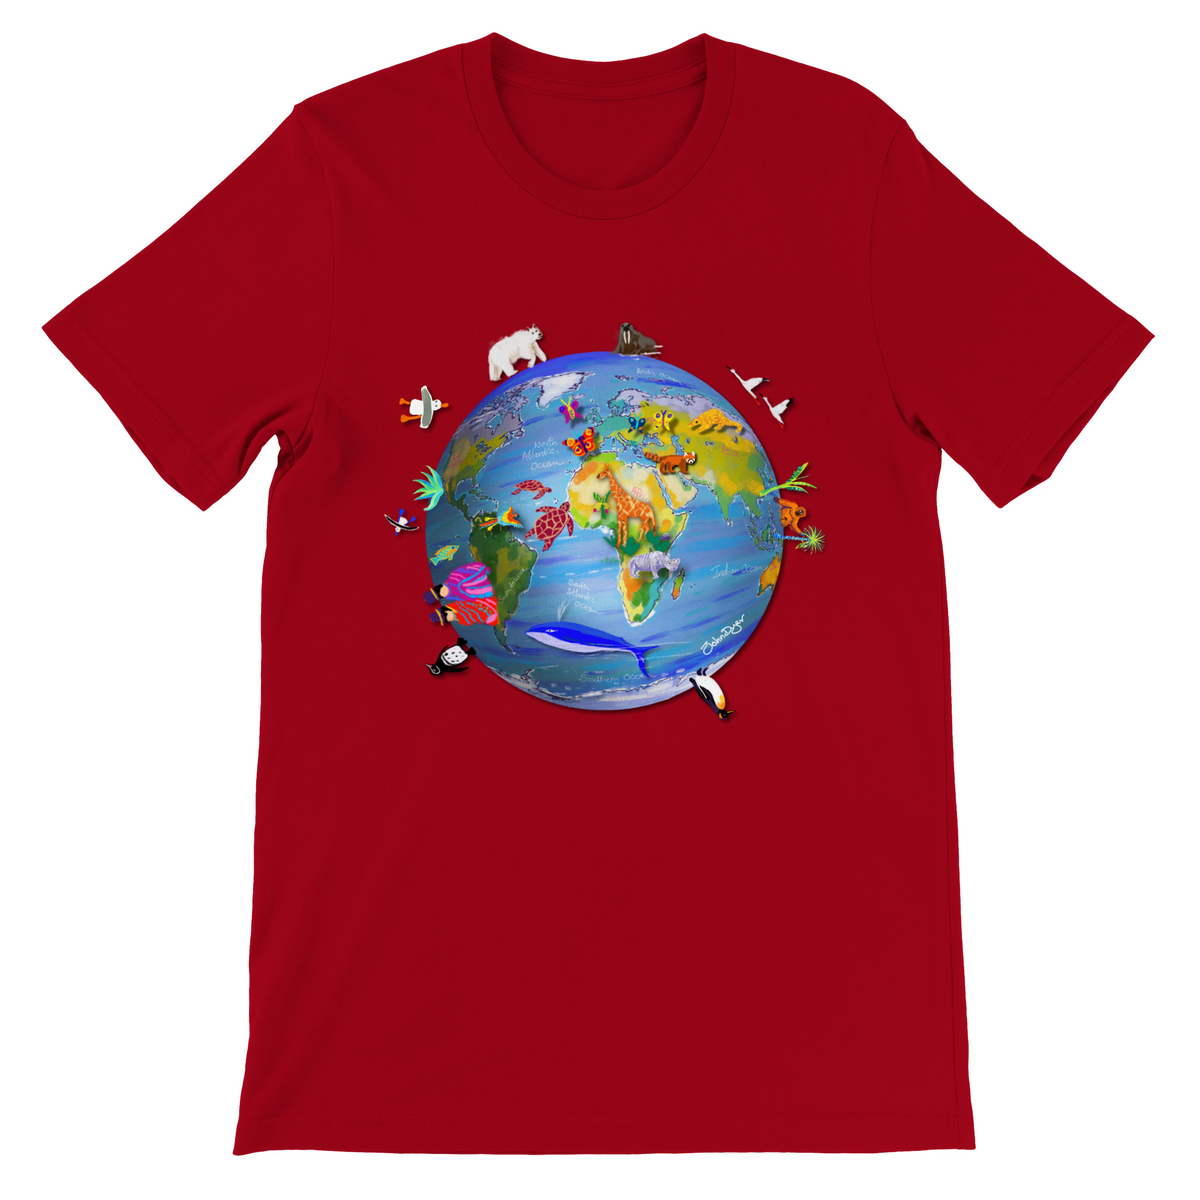 Red Earth T-Shirt featuring art from John Dyer of planet earth, climate change and wildlife. This fantastic art earth t-shirt features a drawing of planet earth with endangered animals and environments. Unisex and eco-friendly. Free worldwide delivery.